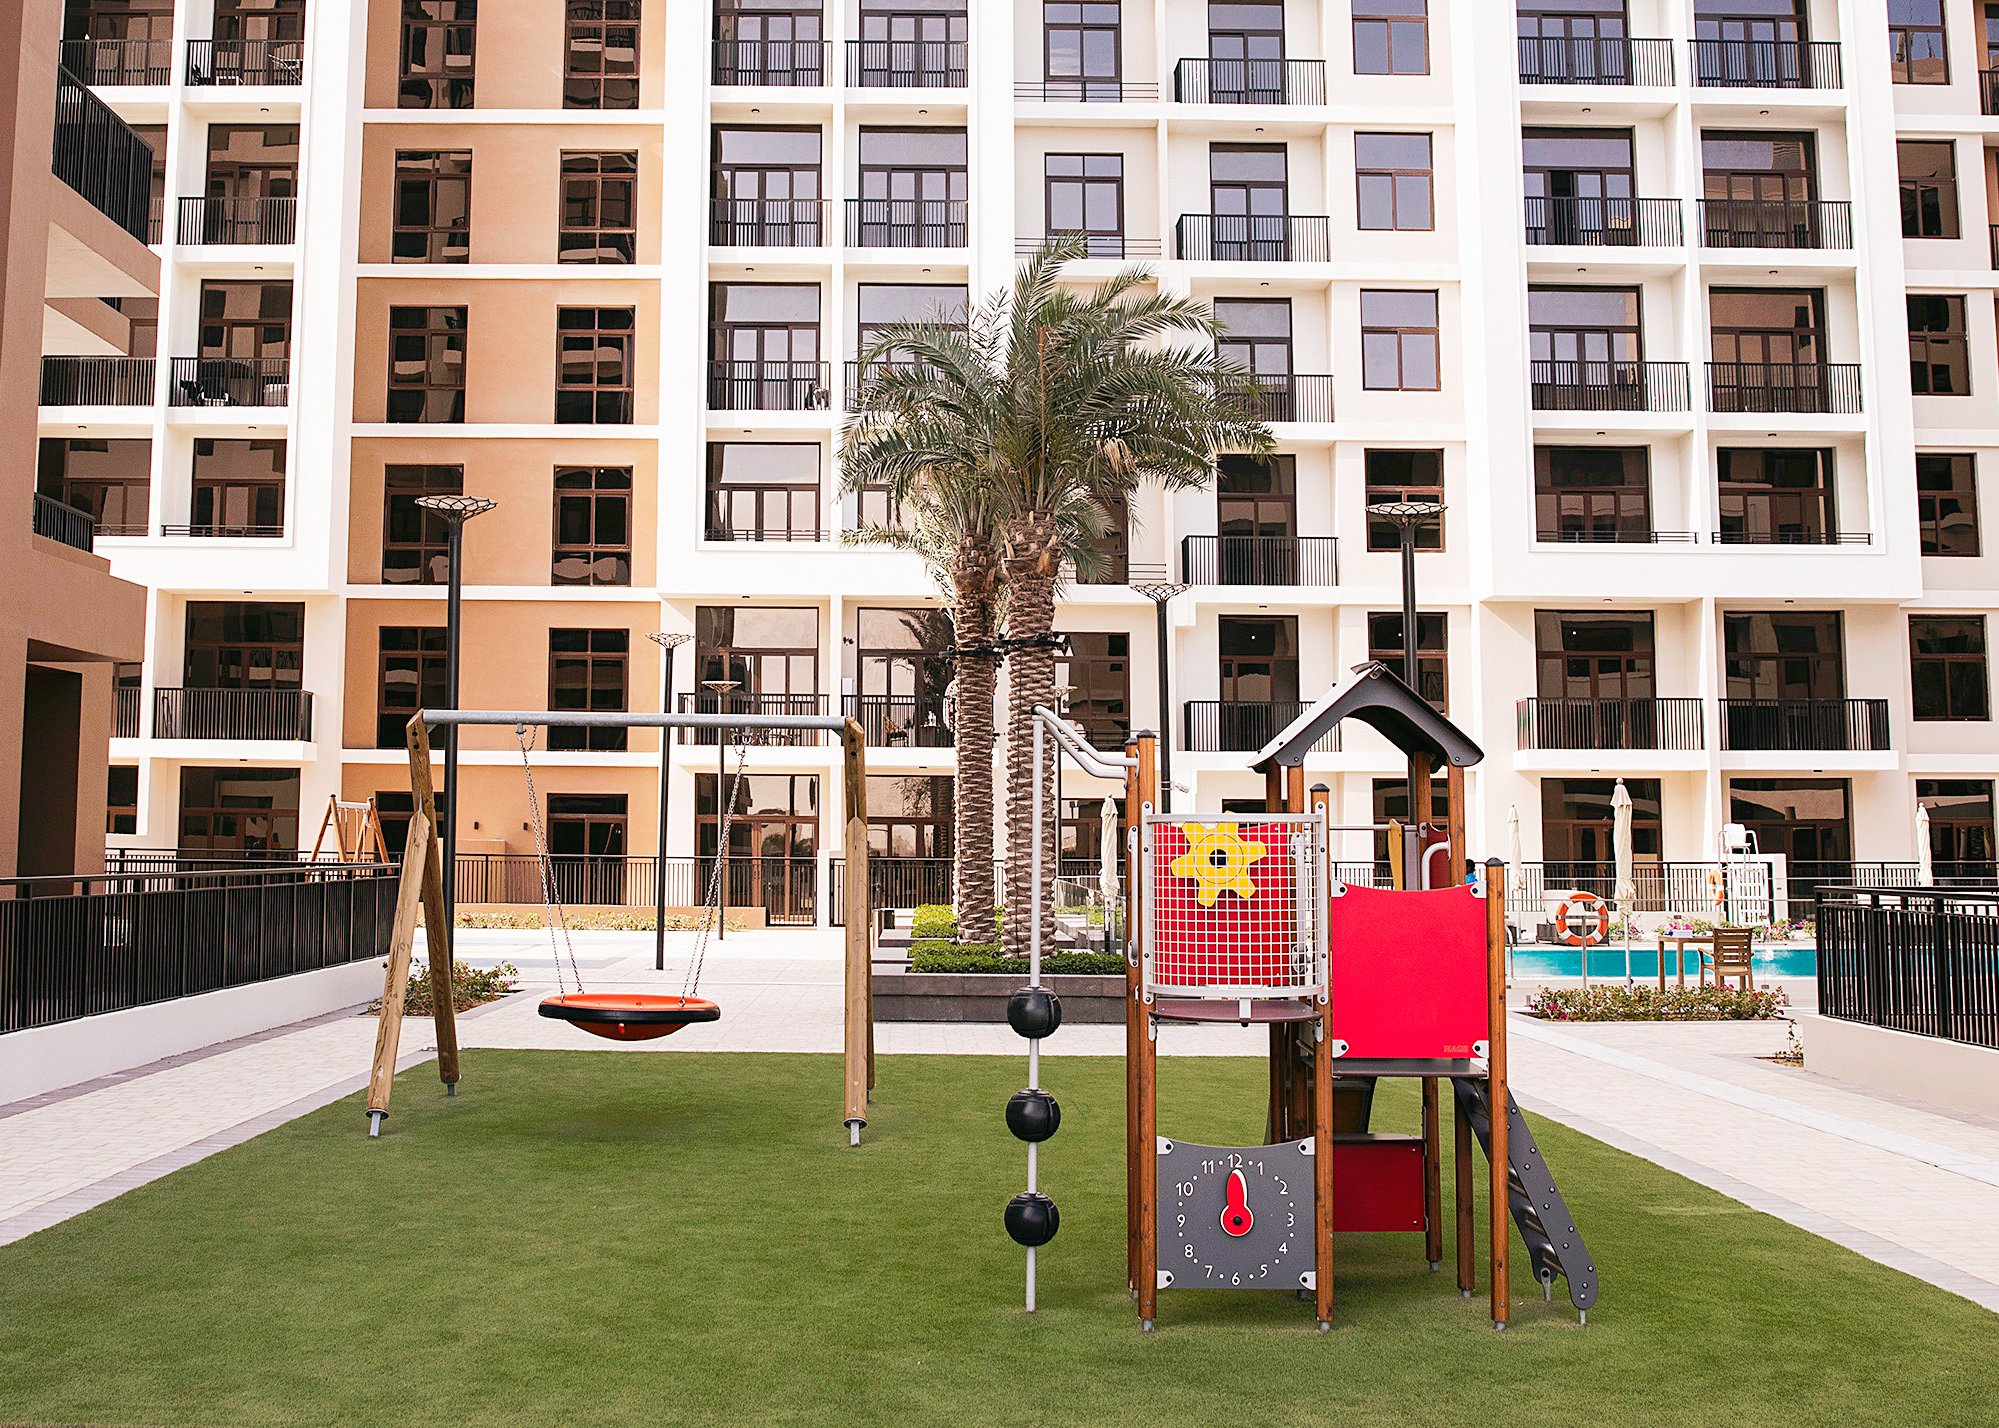 Town Square Dubai on X: Admire the views of the park on board with your  kids at Town Square Dubai's very own mini train! Open daily! Saturday -  Wednesday from 11am 